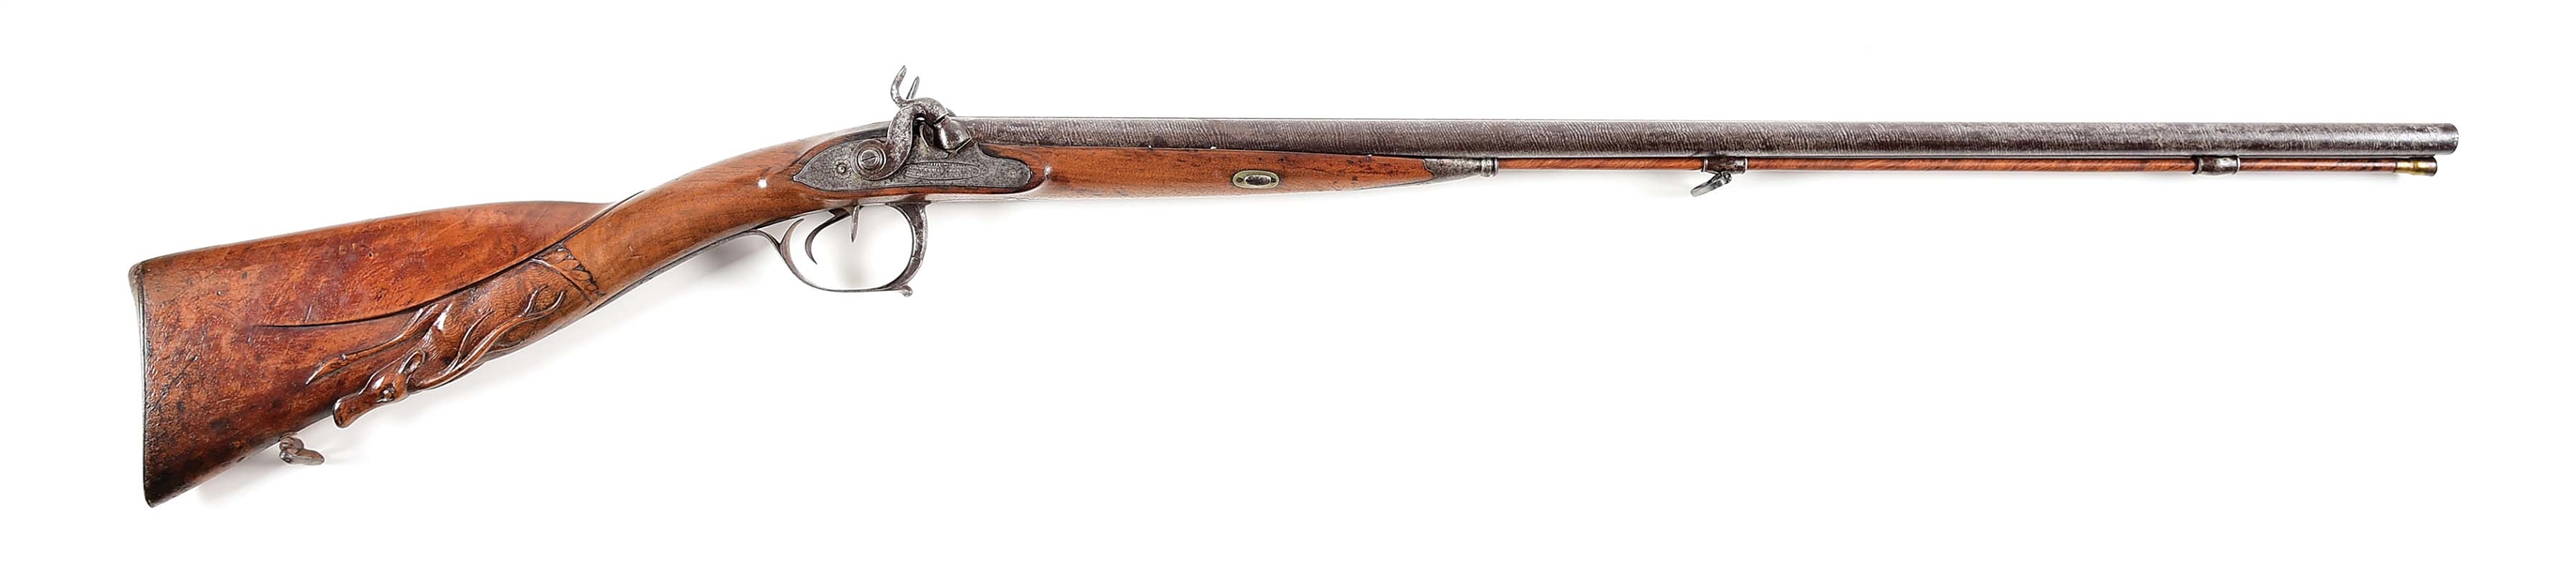 (A) FRENCH PERRIN 20 GAUGE SIDE BY SIDE PERCUSSION SHOTGUN.